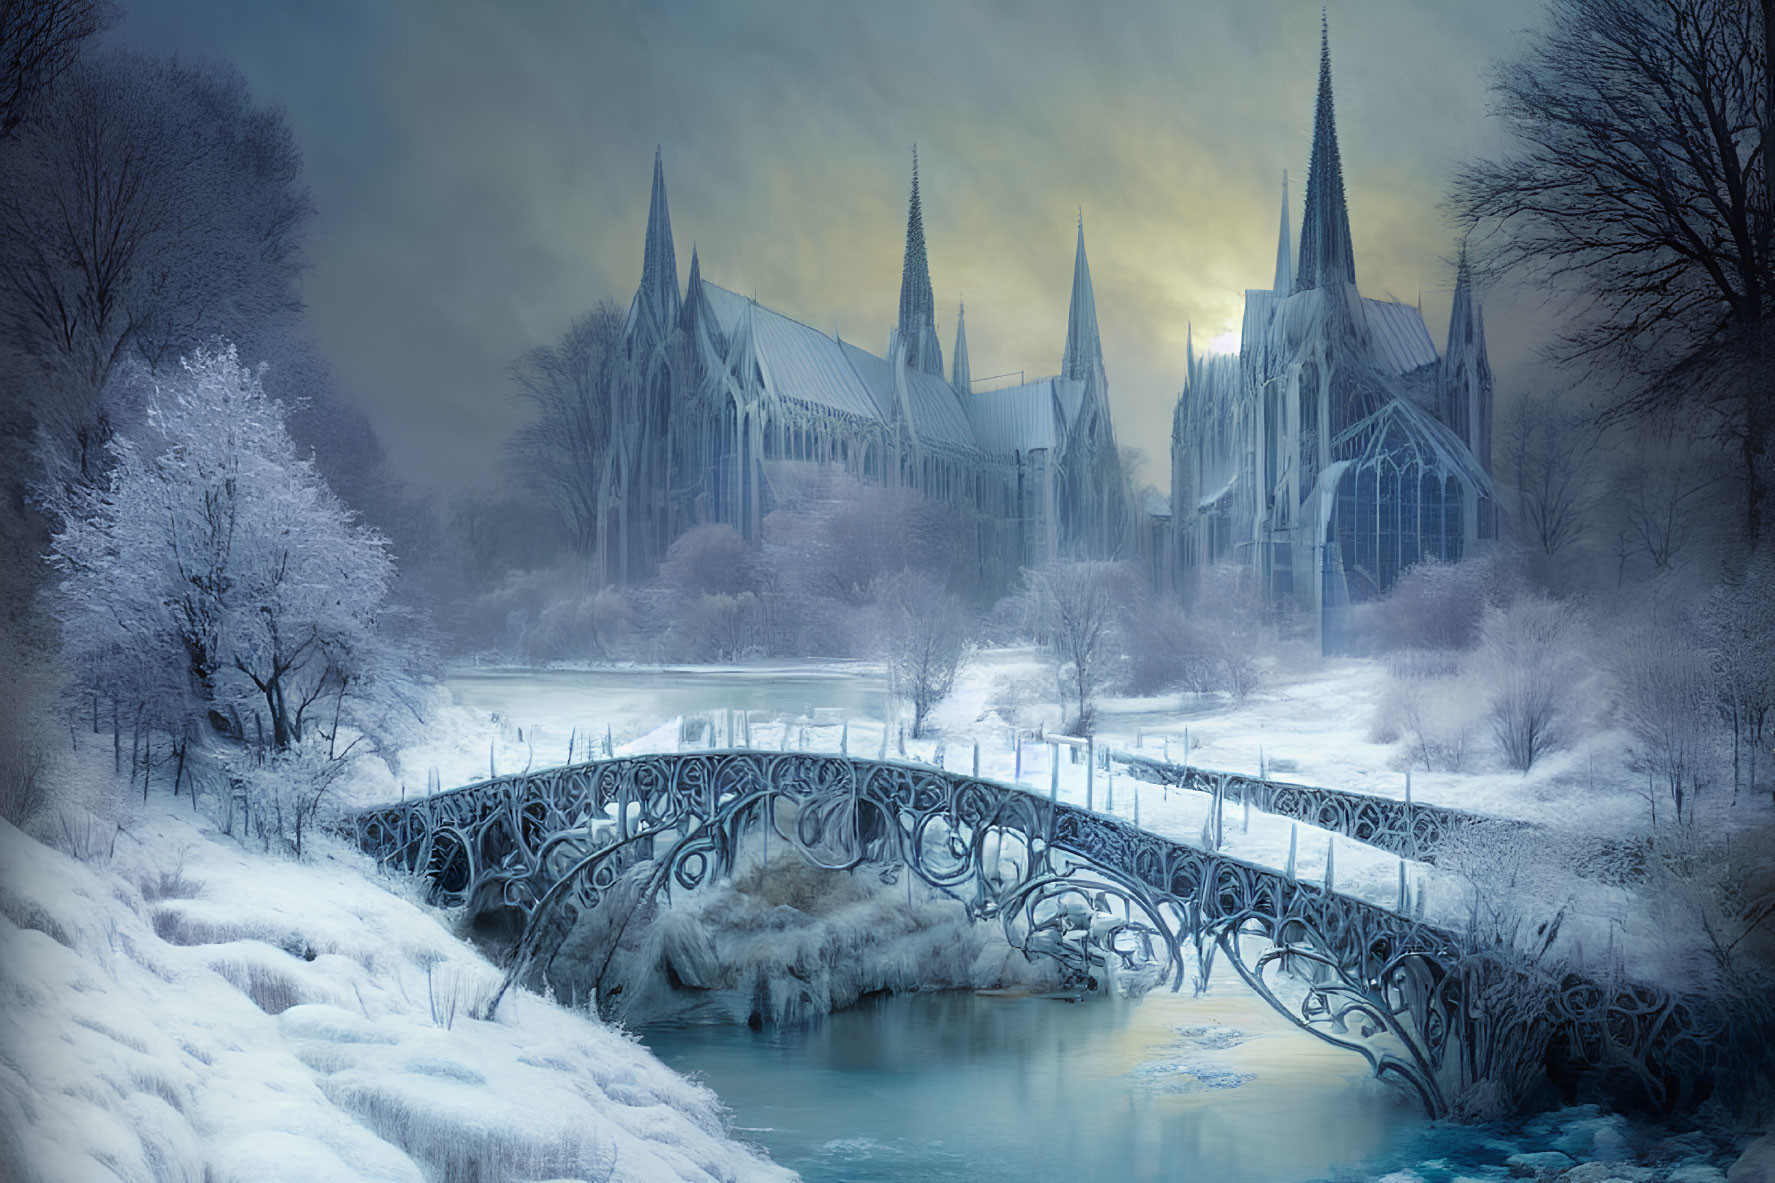 Snowy Gothic cathedral scene with frozen river and wrought-iron bridge